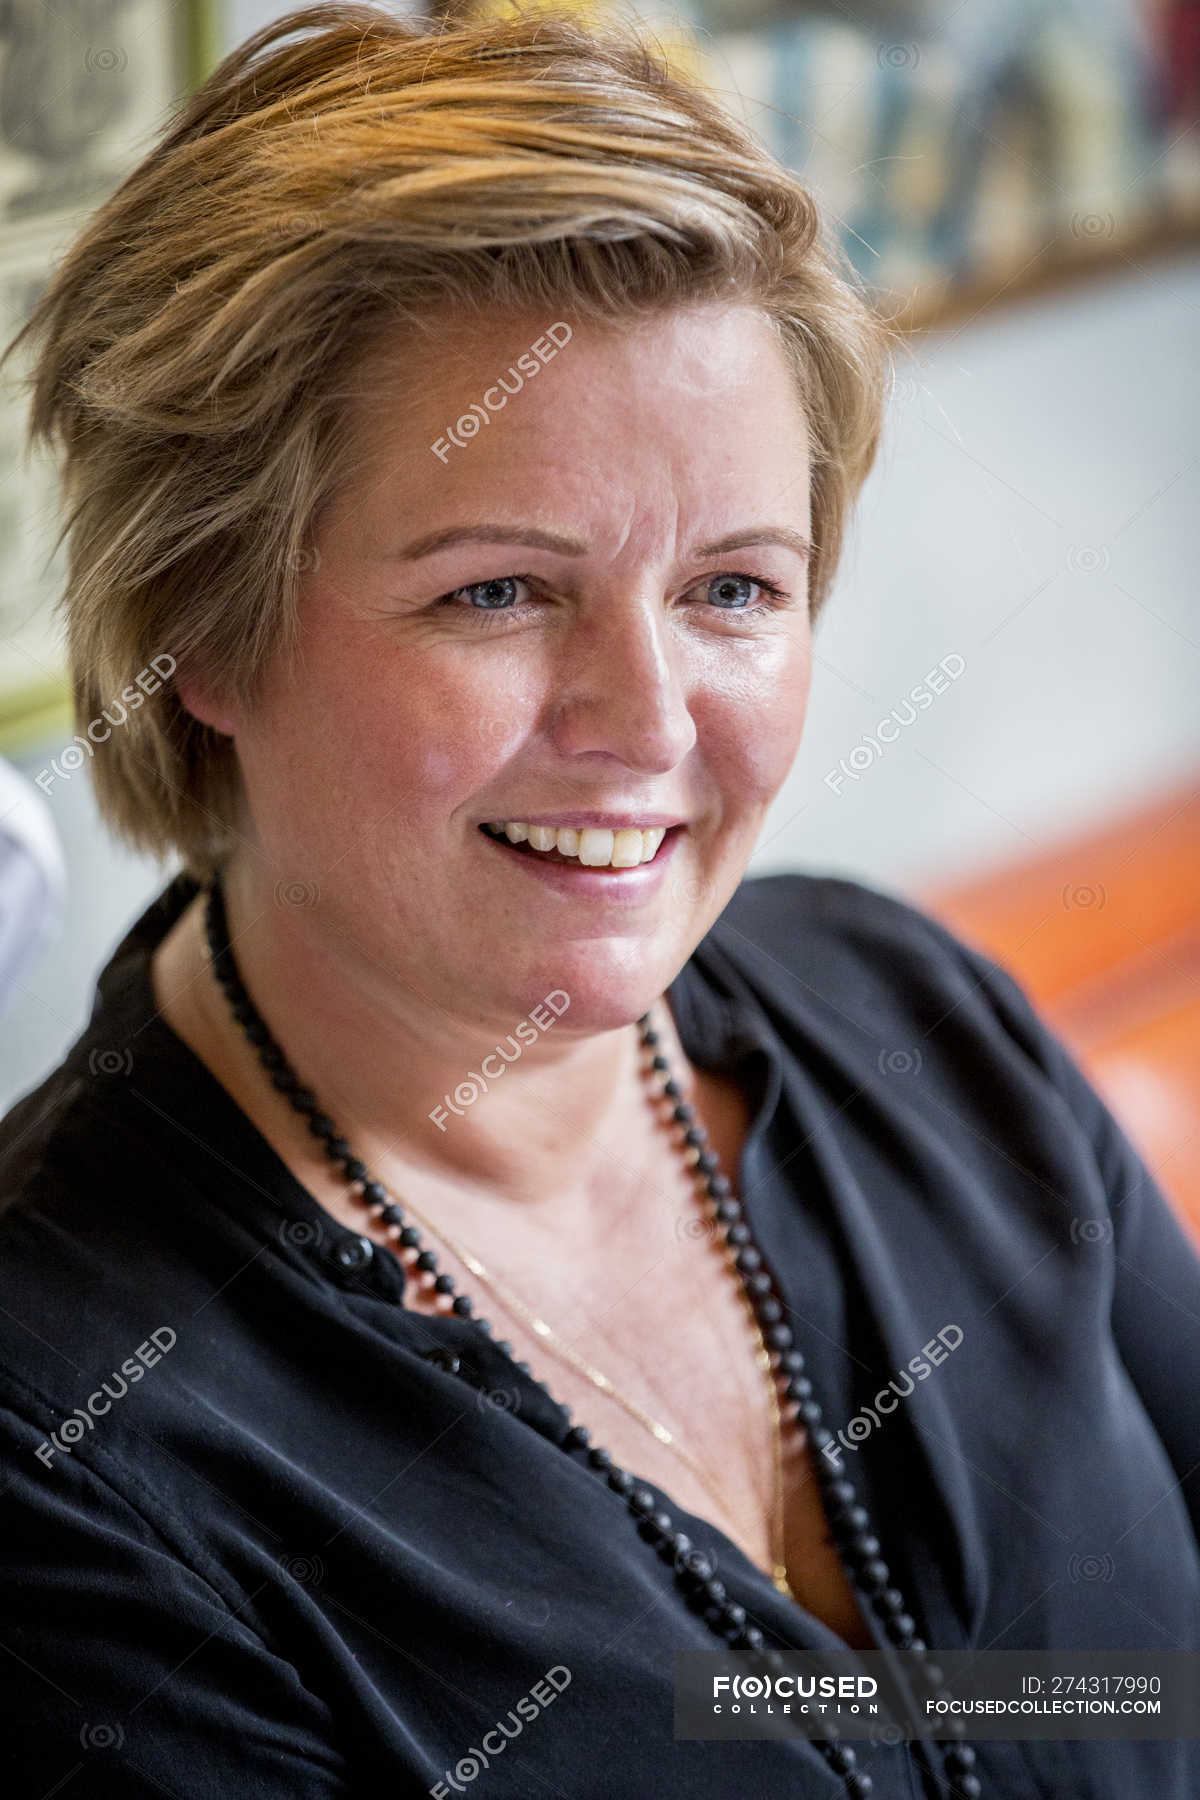 Portrait Of Smiling Mature Woman With Short Blonde Hair In Black